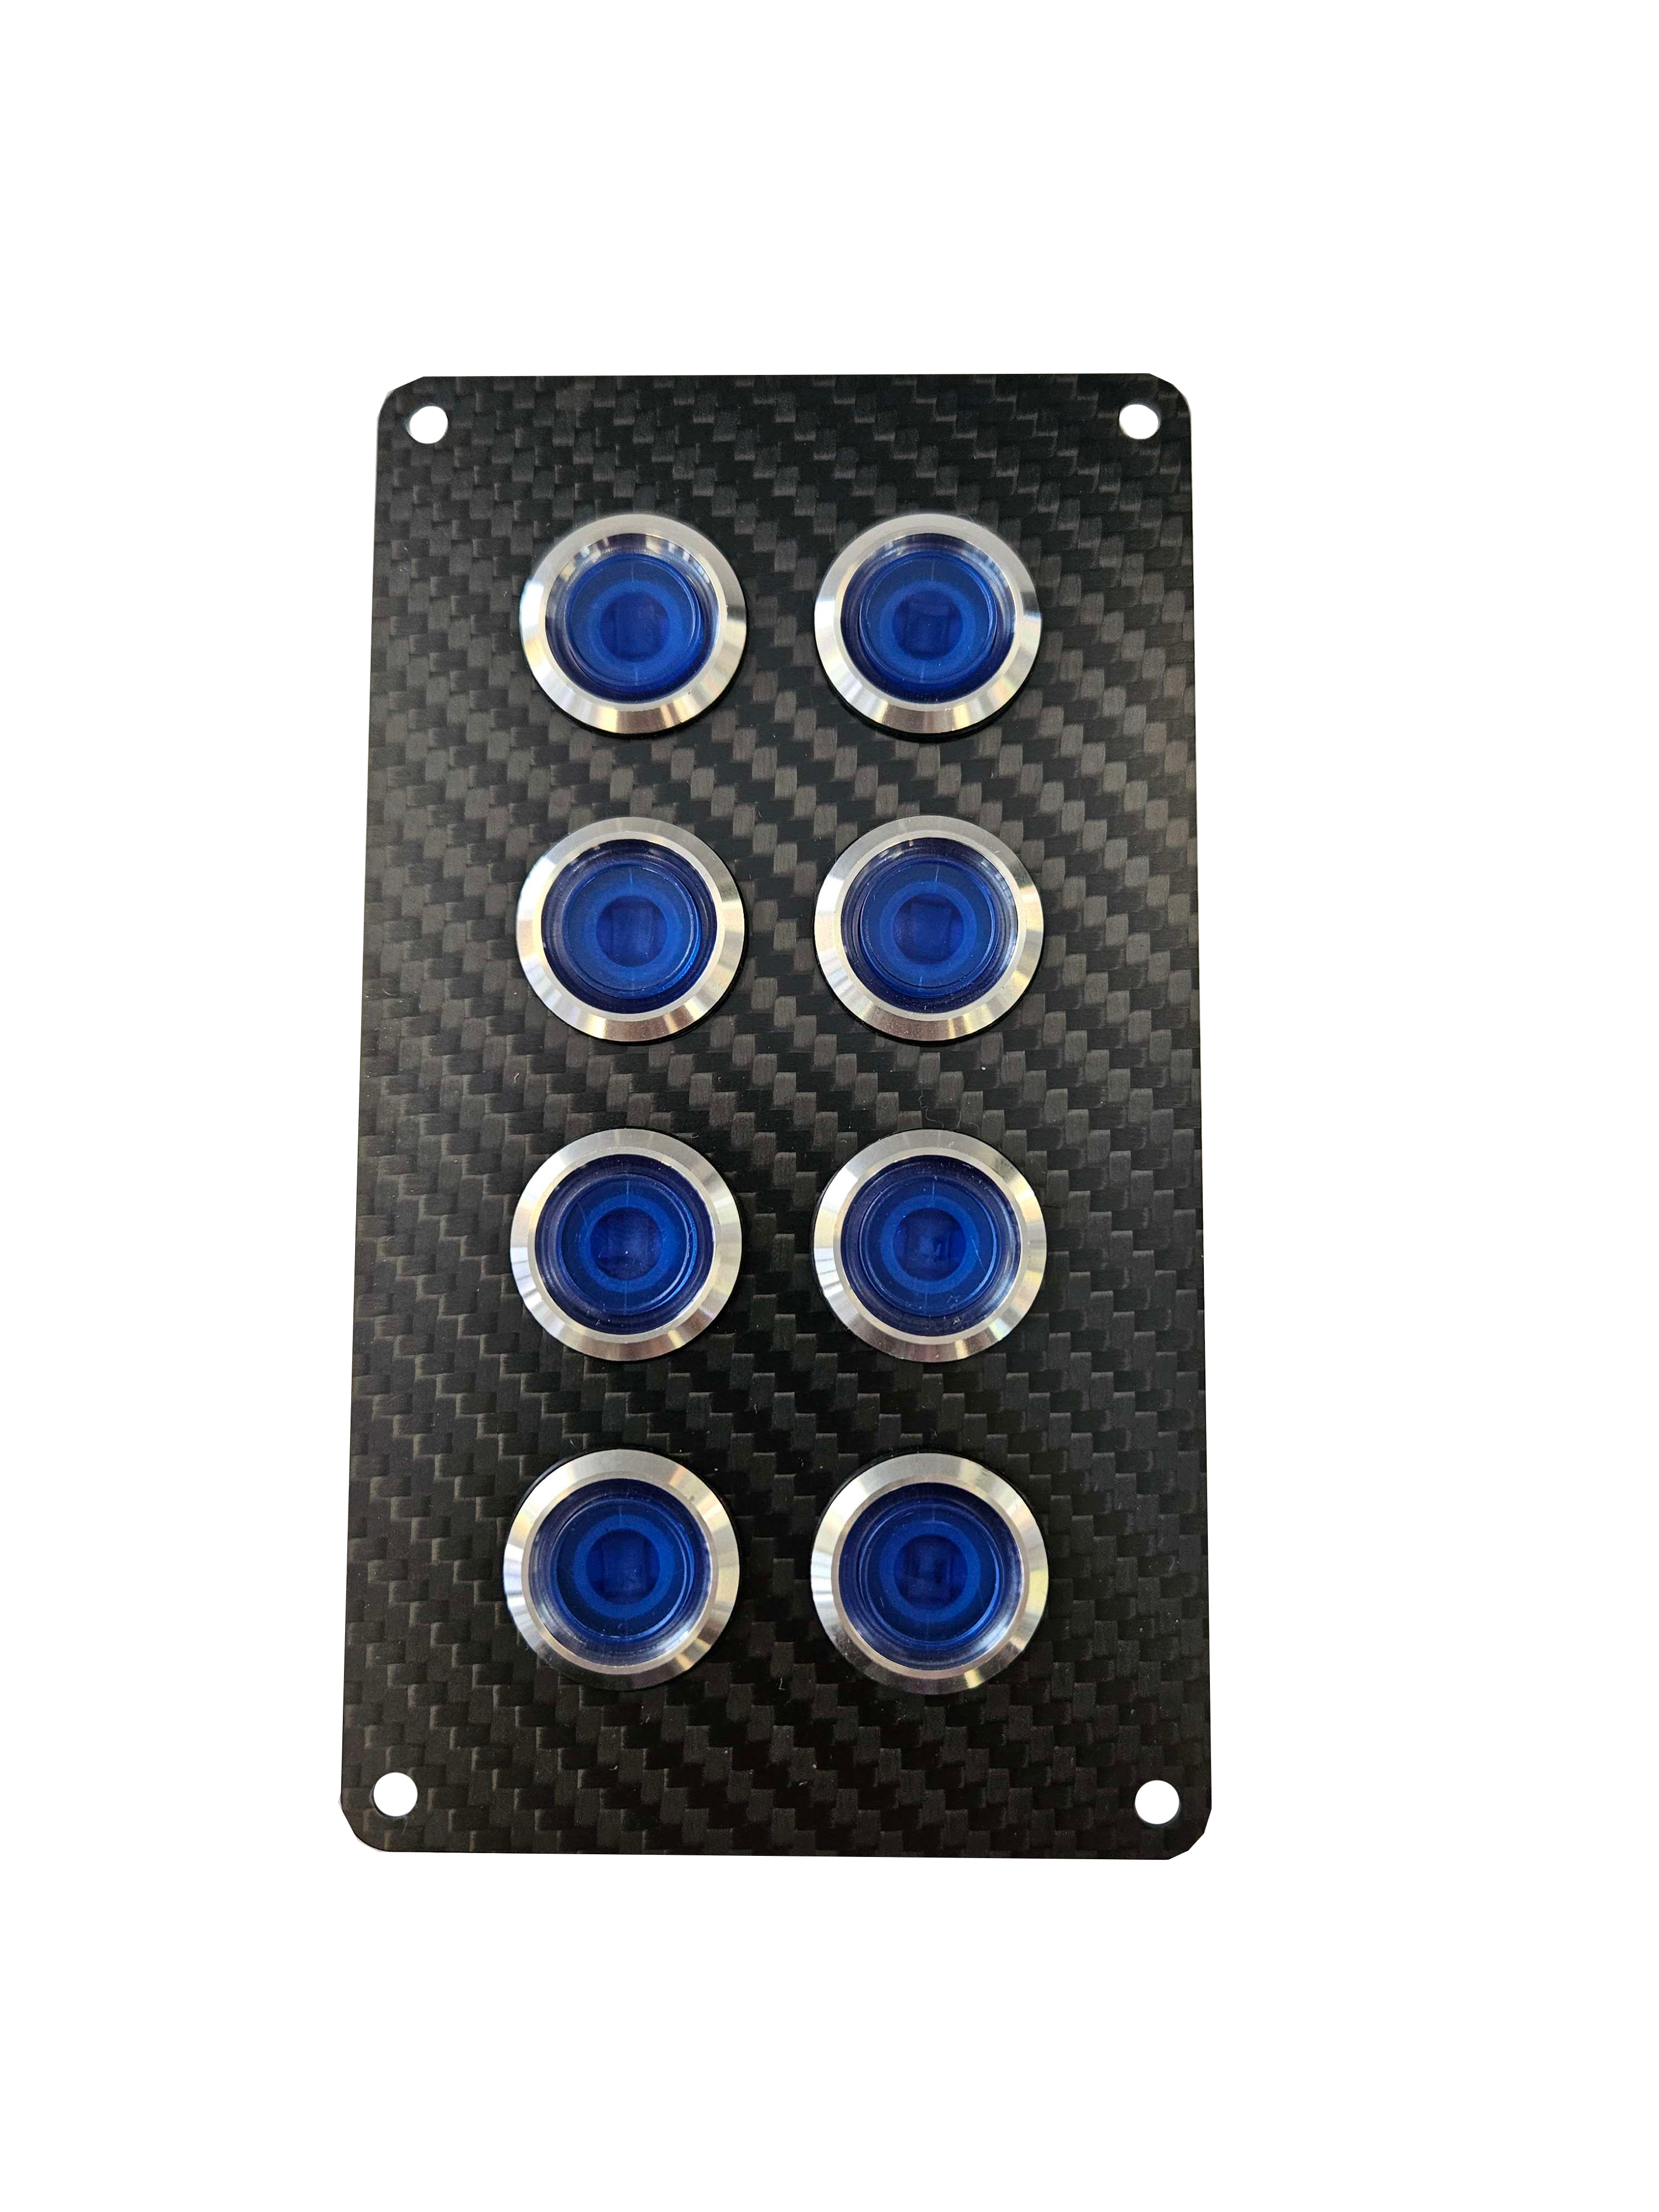 8 gang carbon fibre switch panel with 15A backlit switches